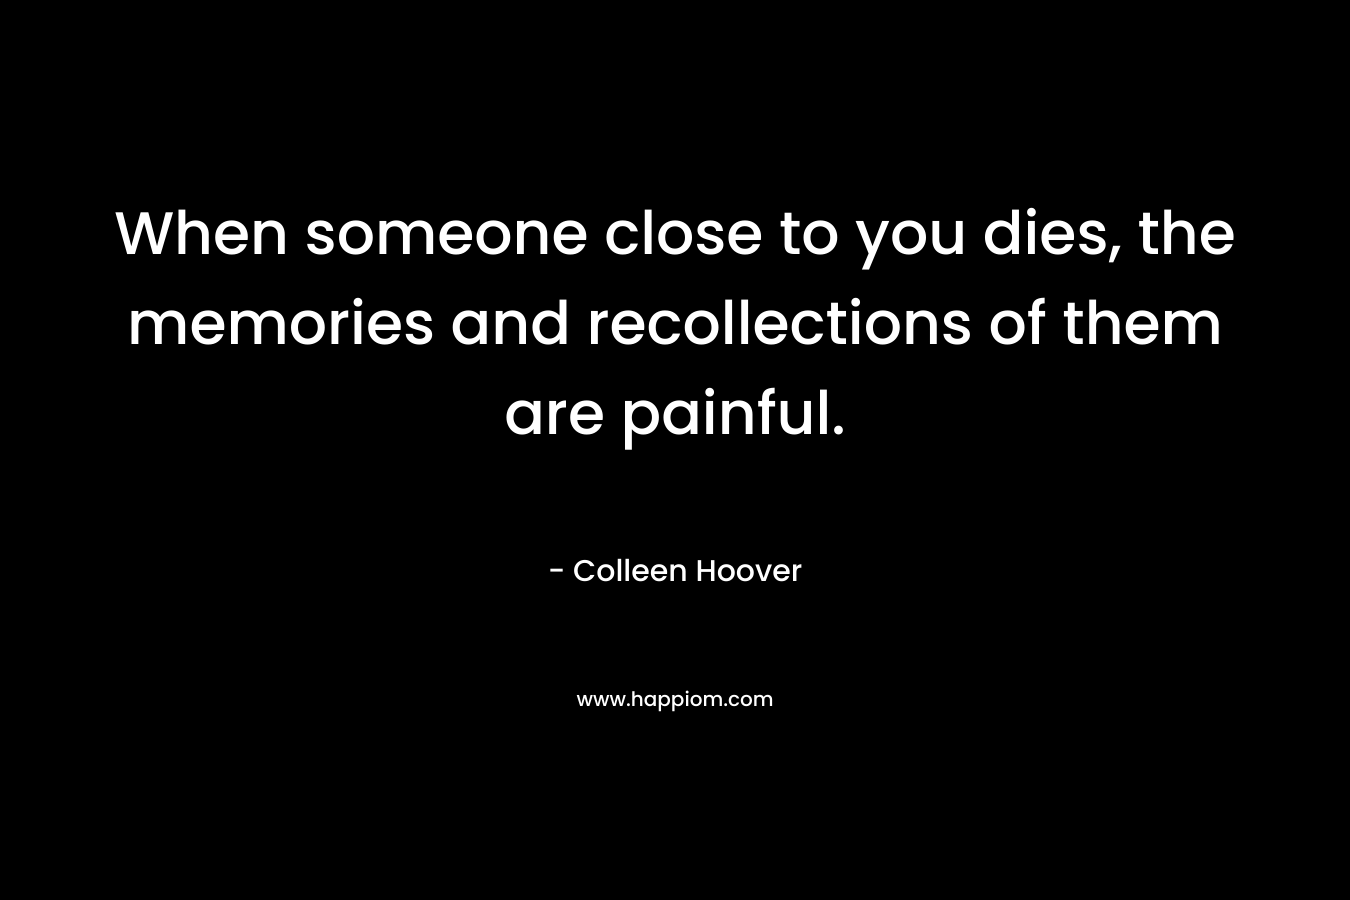 When someone close to you dies, the memories and recollections of them are painful.